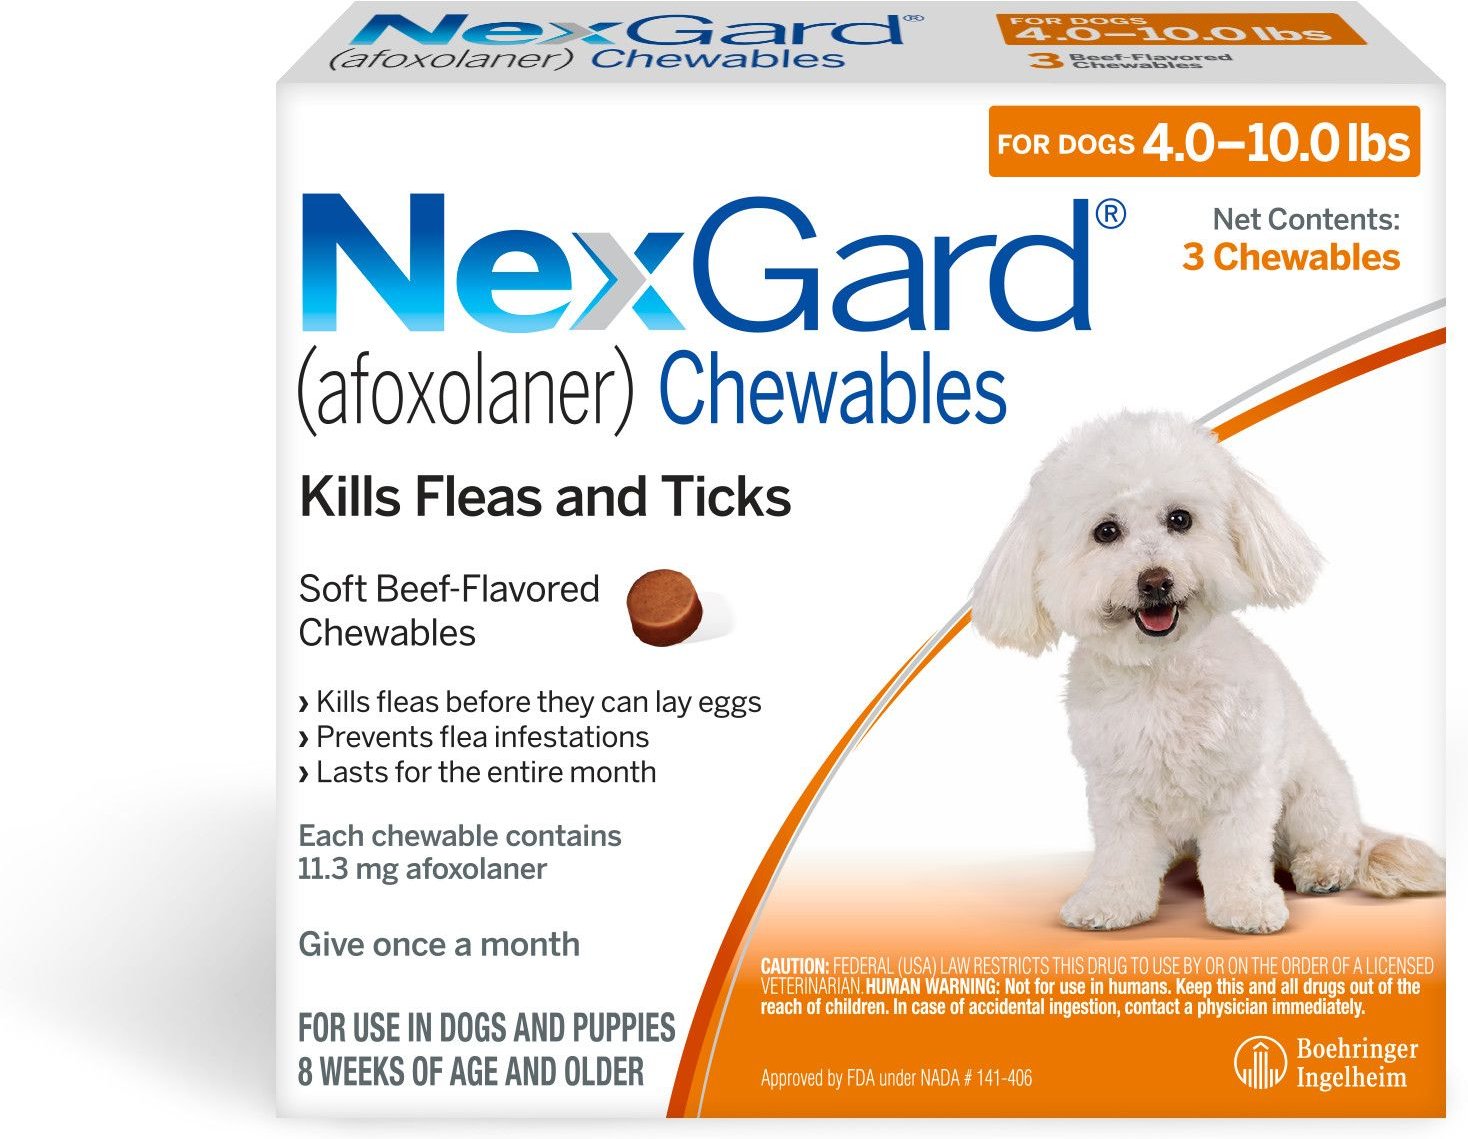 NEXGARD Chewables for Dogs, 4-10 lbs, 3 